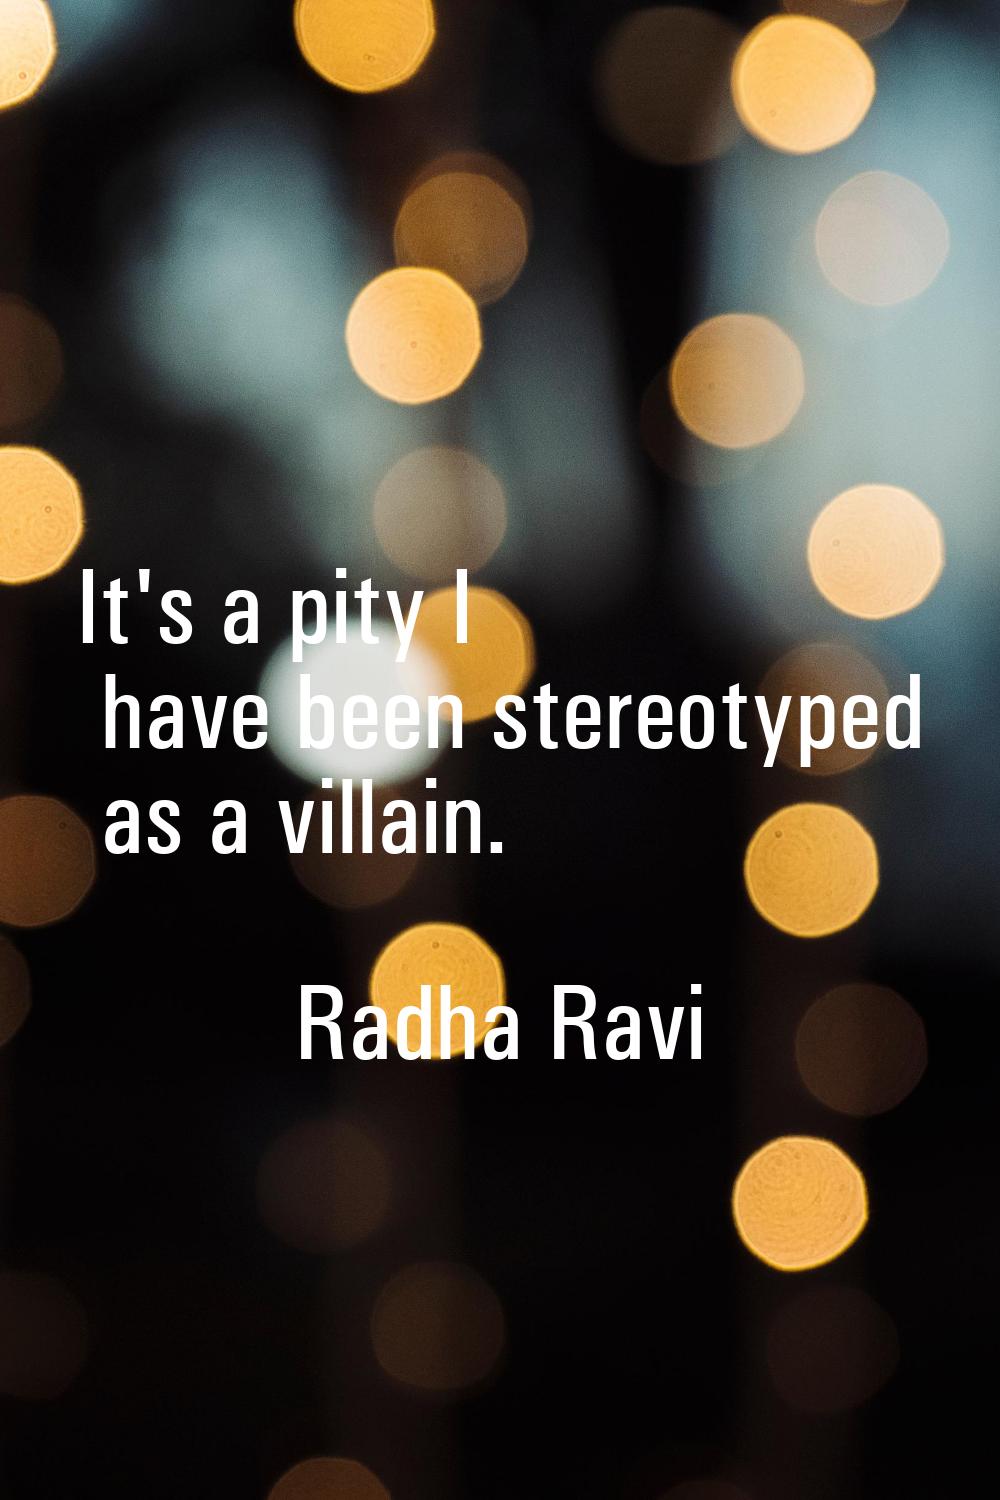 It's a pity I have been stereotyped as a villain.